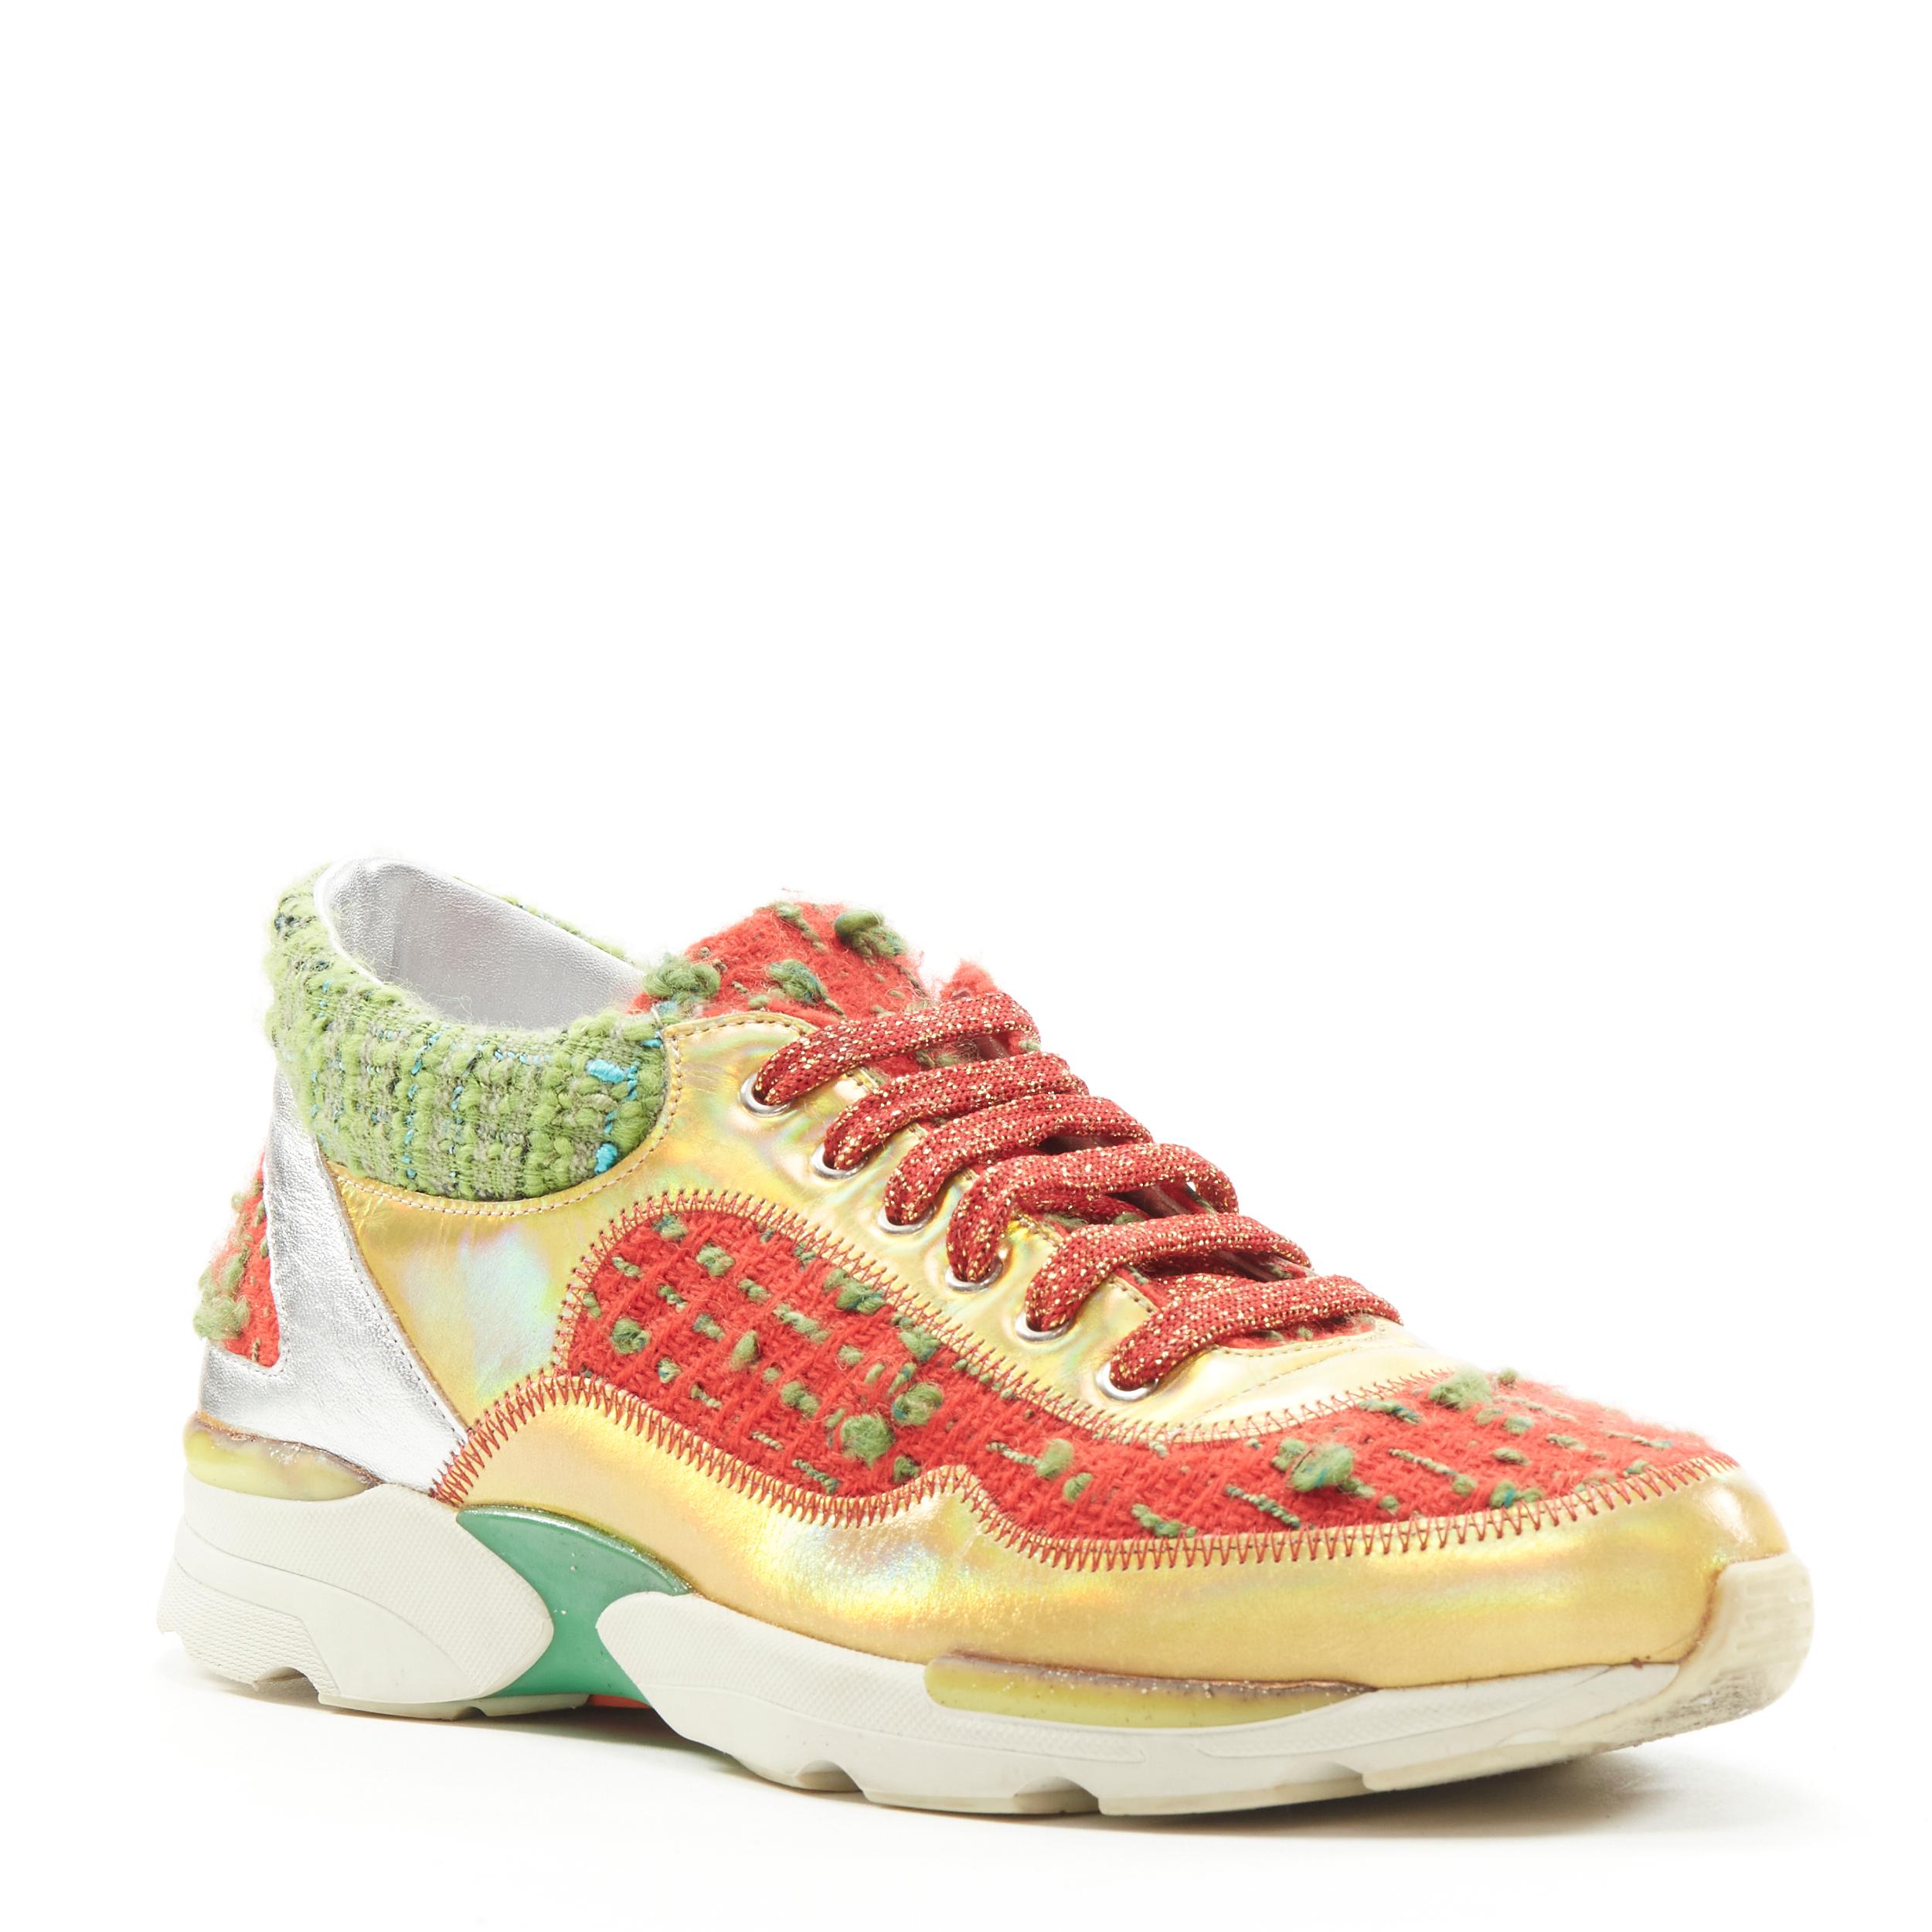 CHANEL iridescent gold red green tweed low top sneaker EU36.5 
Reference: ANWU/A00388 
Brand: Chanel 
Designer: Karl Lagerfeld 
Collection: 2014
Material: Tweed 
Color: Gold 
Pattern: Solid 
Closure: Lurex red laces 
Made in: Italy 


CONDITION: